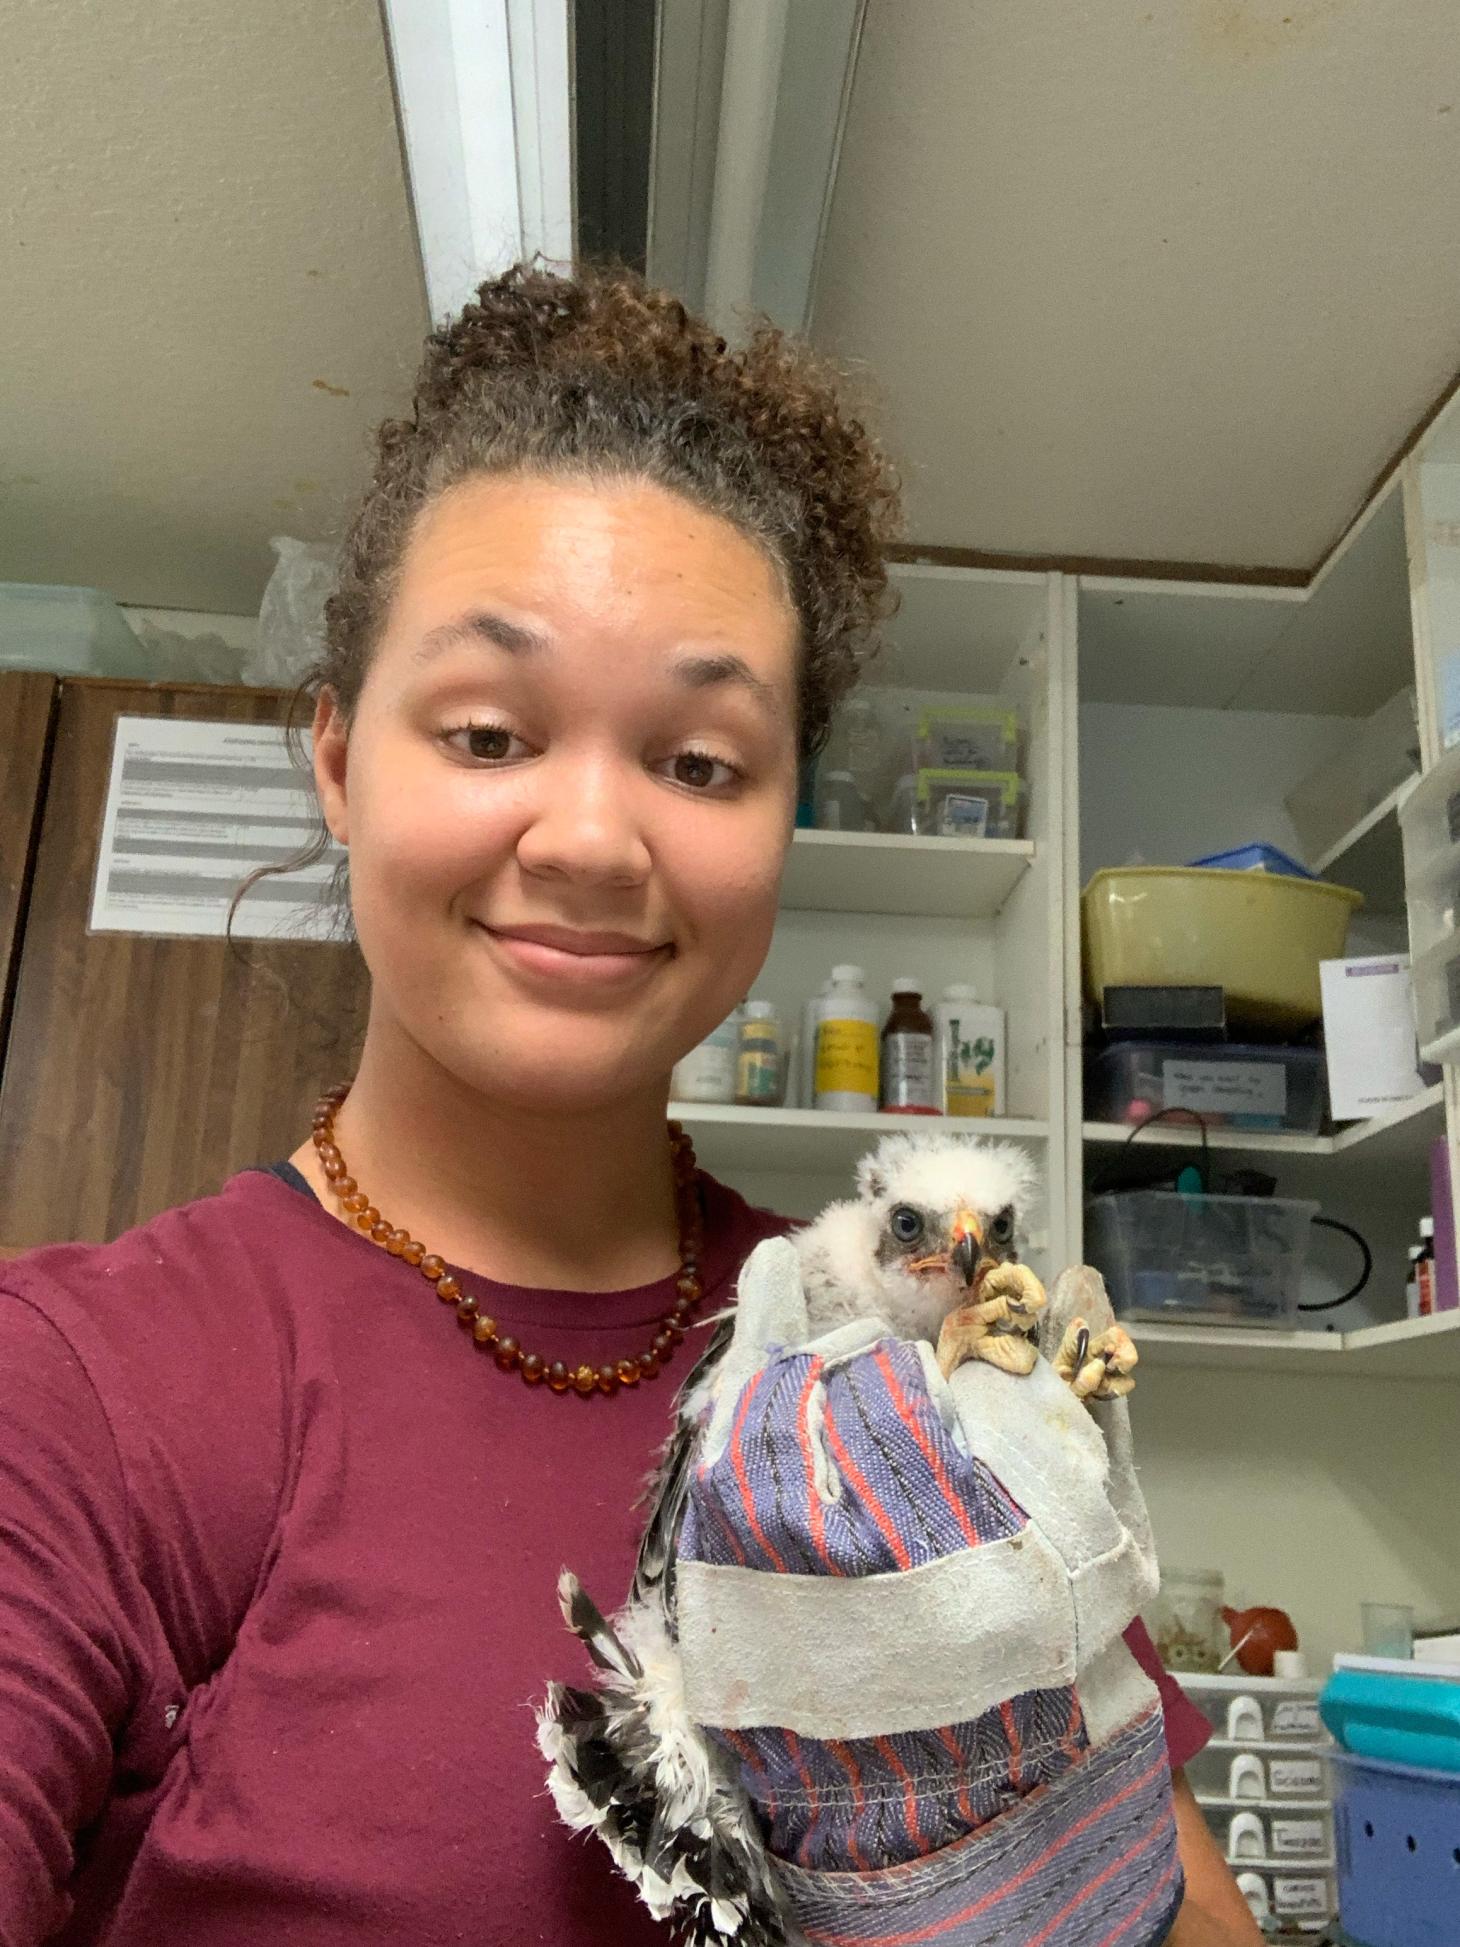 In a selfie provided by Camrie, she holds a chick of a large bird breed in a gloved hand and smiles at the camera. She is wearing a Wildlife Images Tshirt. 